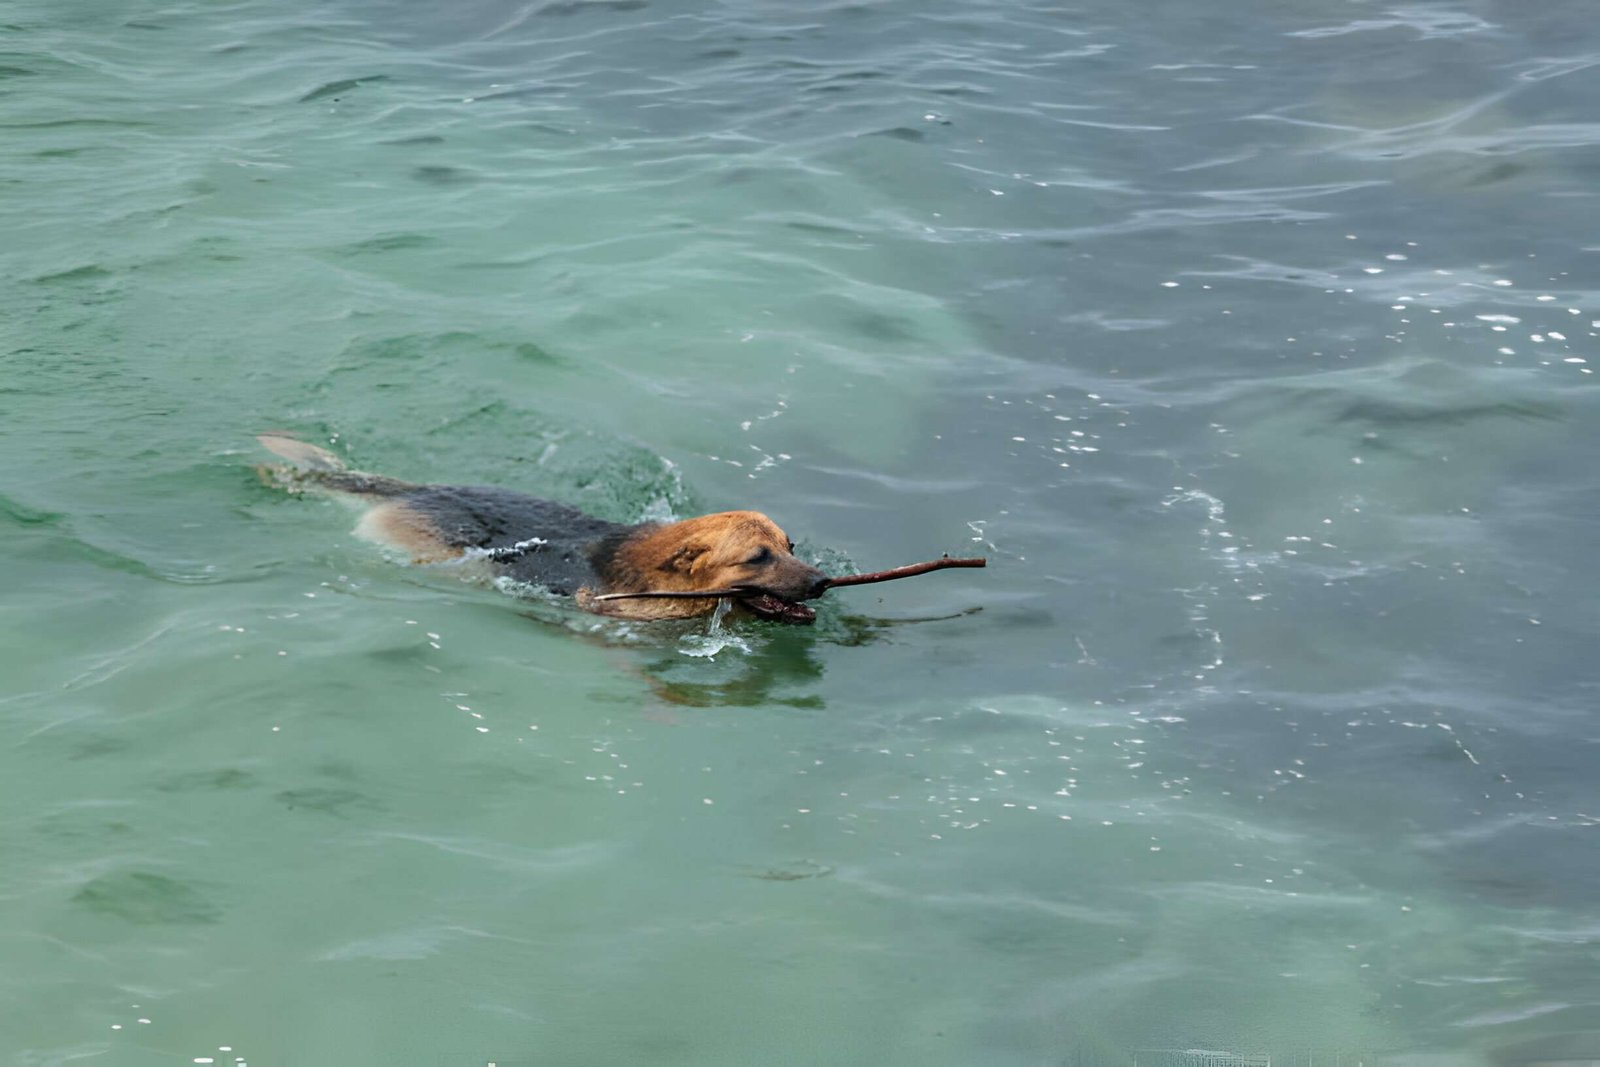 hound is learning swimming